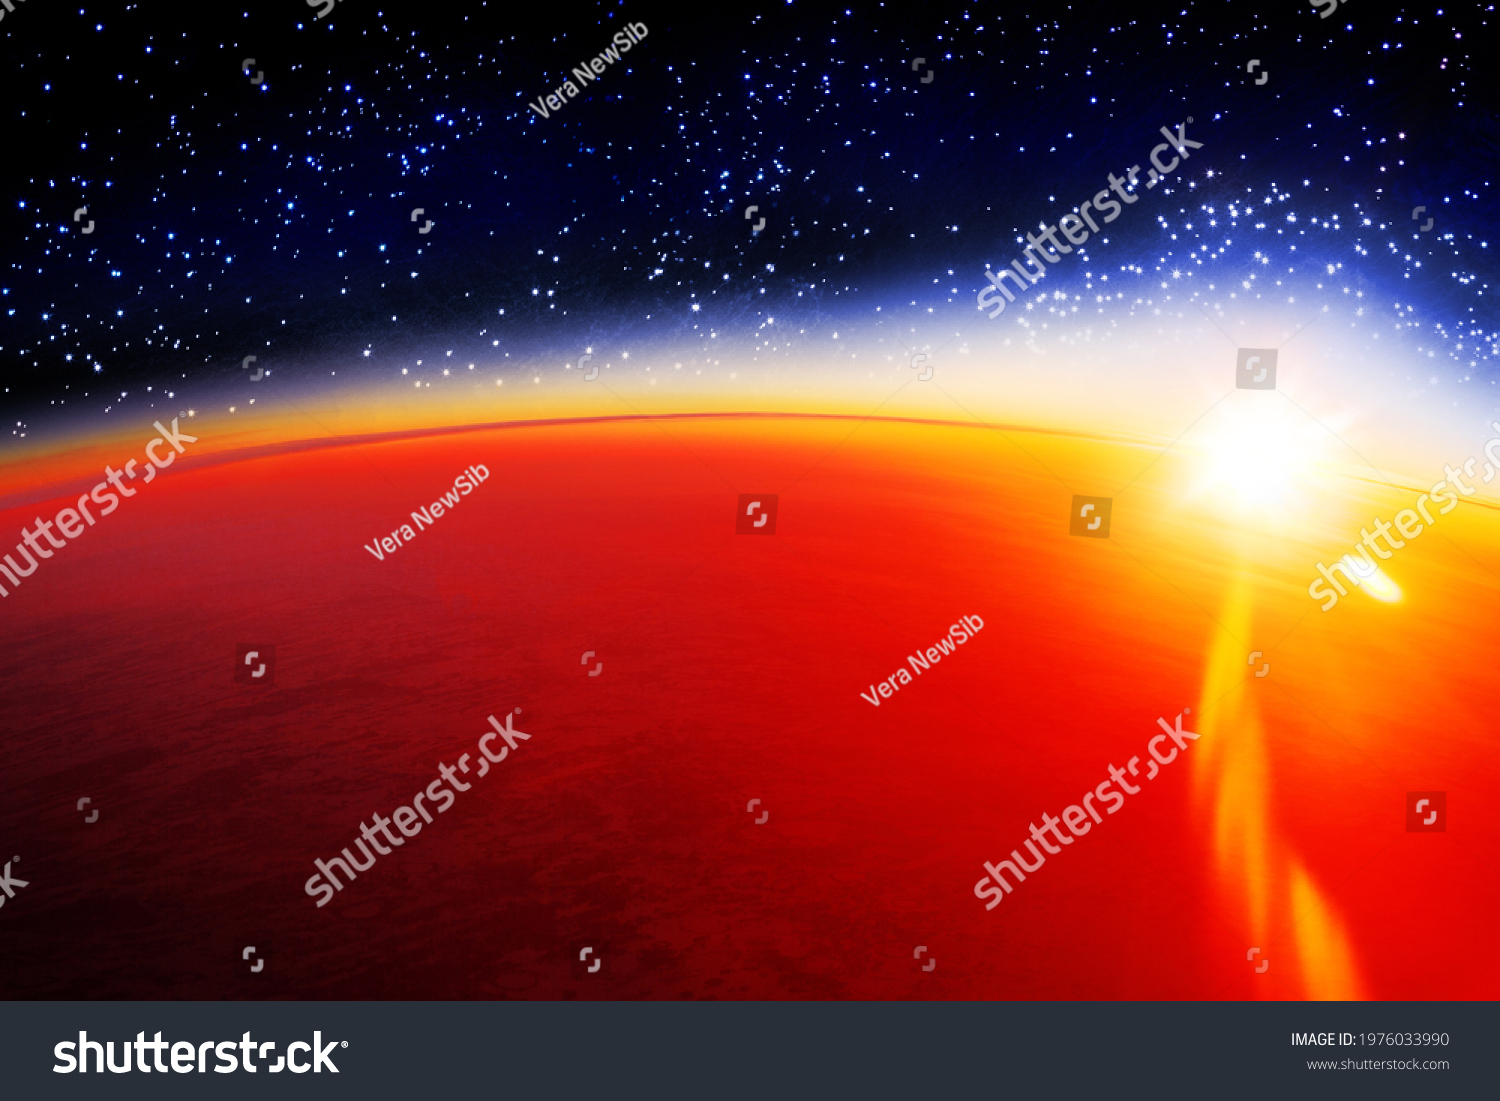 Cosmic sunset landscape, sunrise in cosmos over planet Mars horizon, stars, dark blue sky, yellow sun light rays, red sunlight glow, celestial bodies view, abstract alien galaxy, fantasy outer space #1976033990